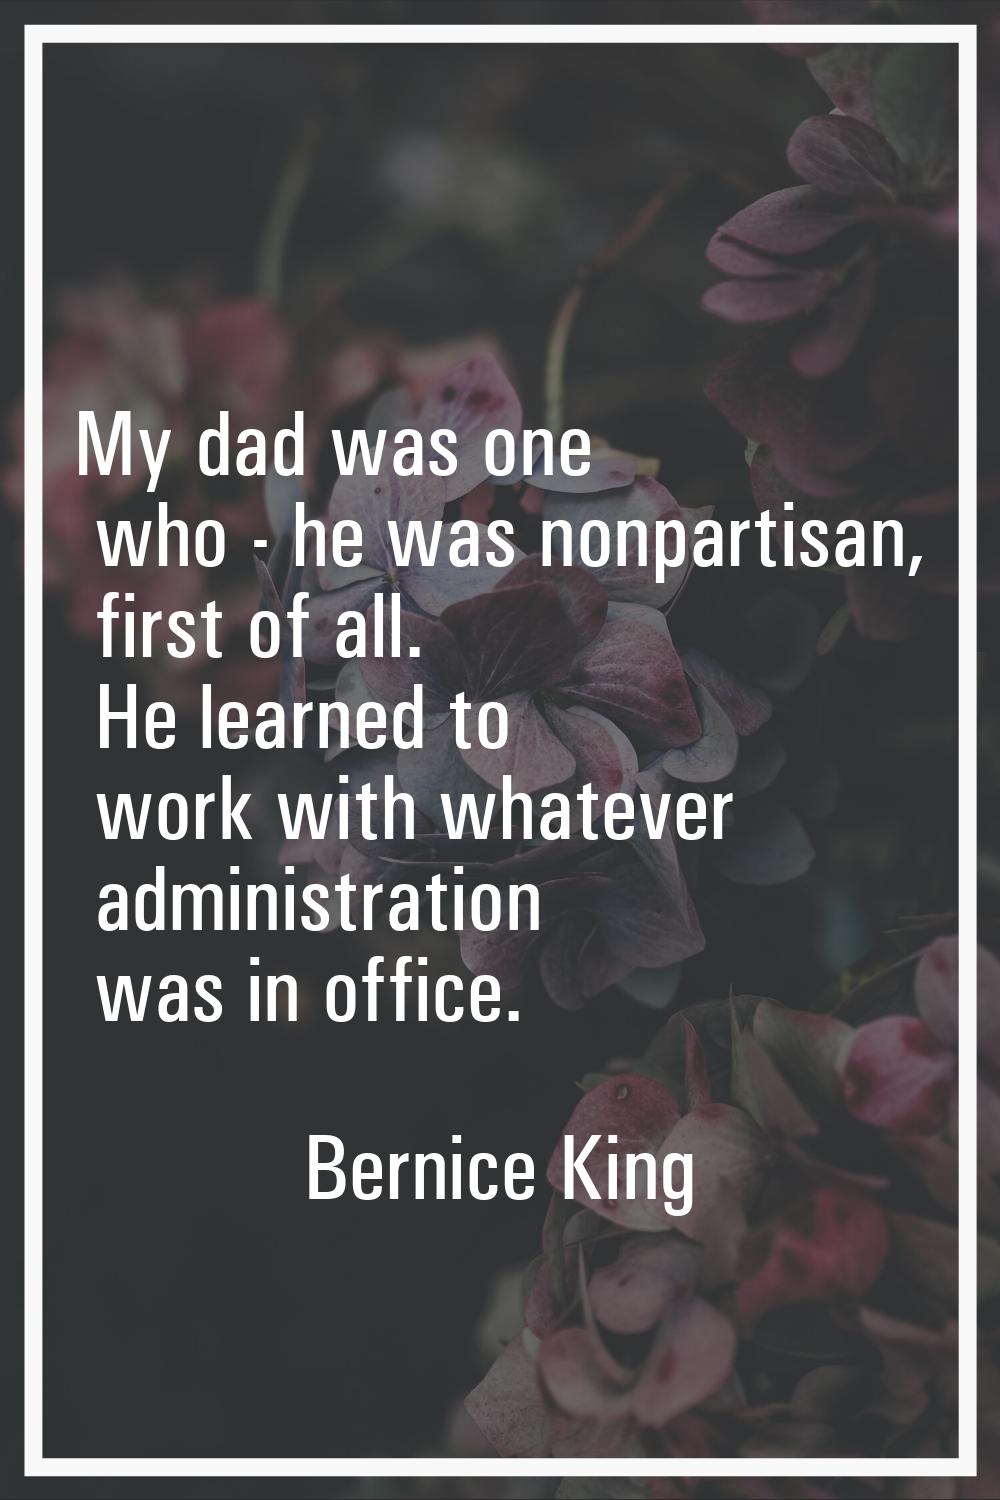 My dad was one who - he was nonpartisan, first of all. He learned to work with whatever administrat